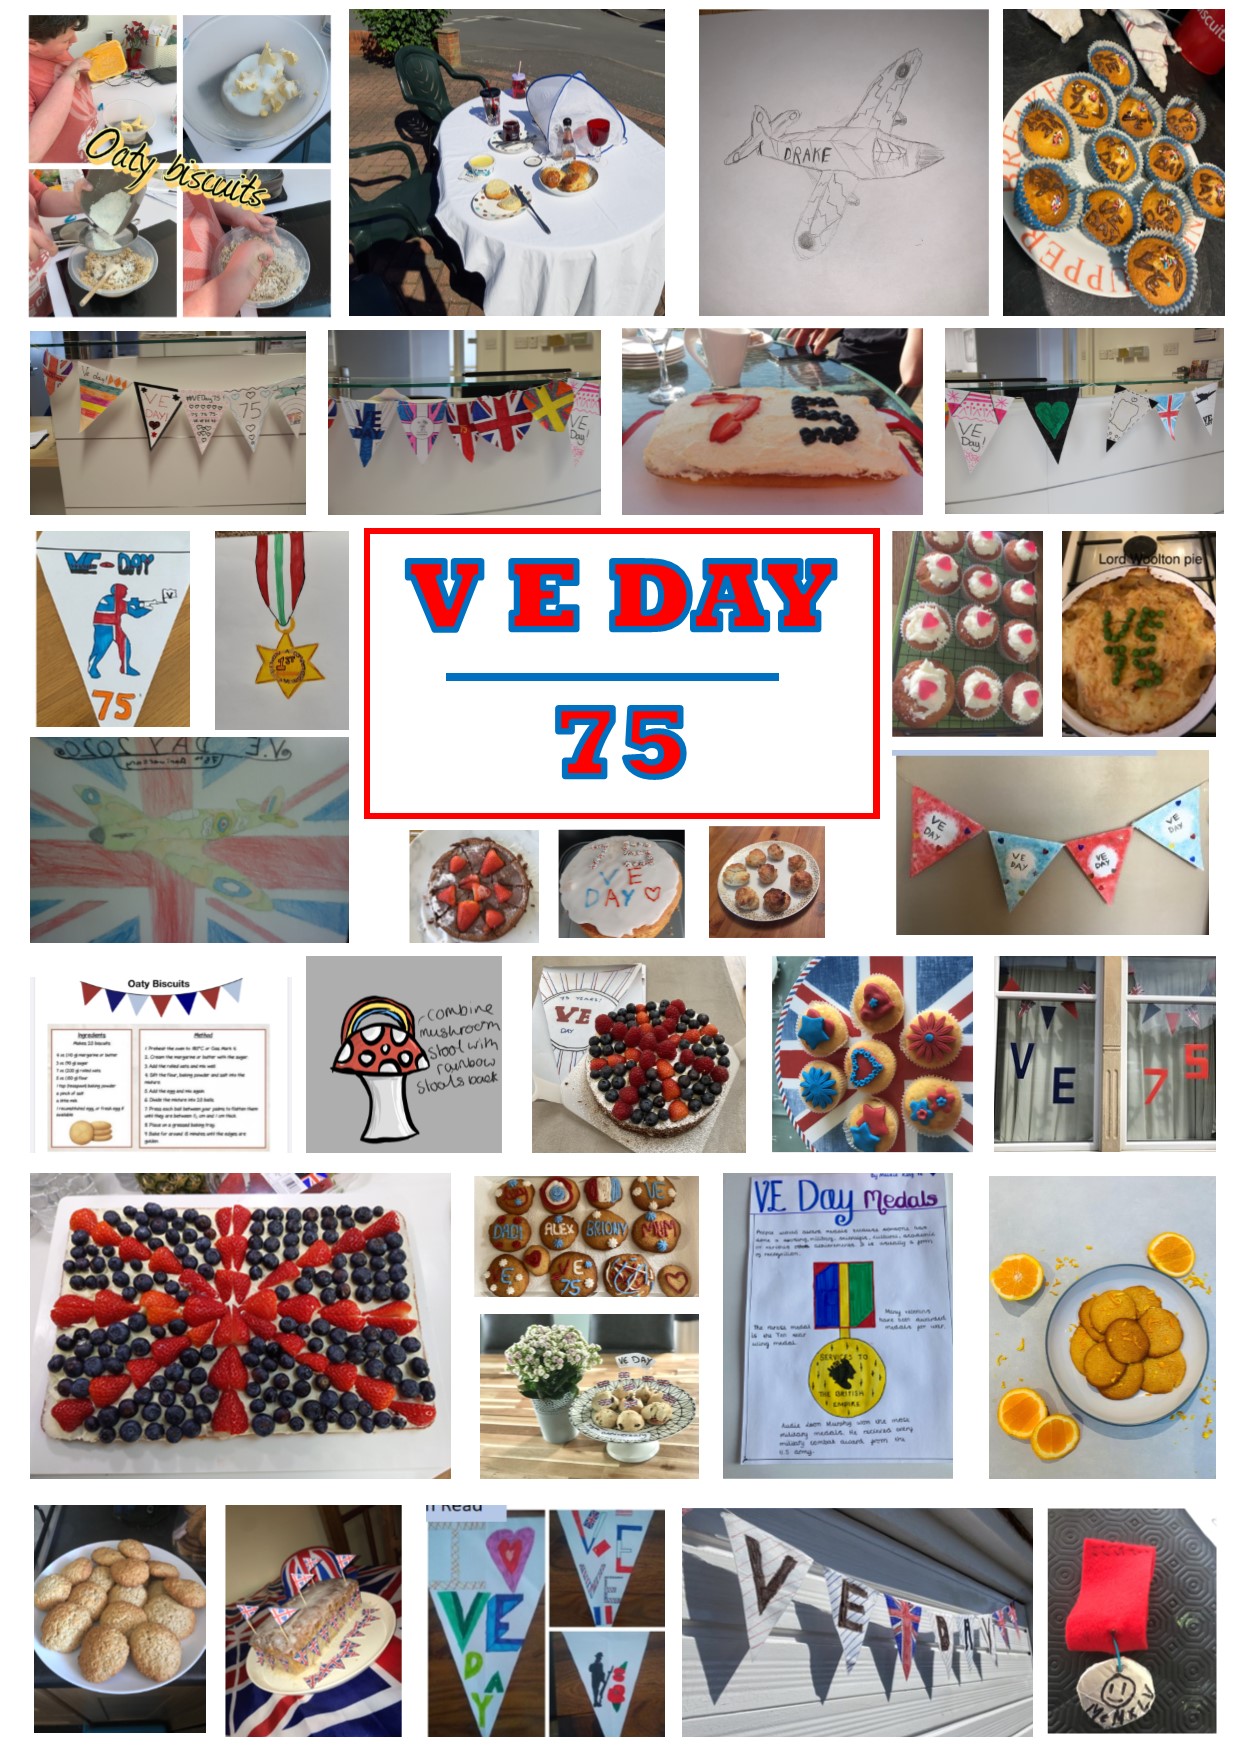 VE DAY MONTAGE